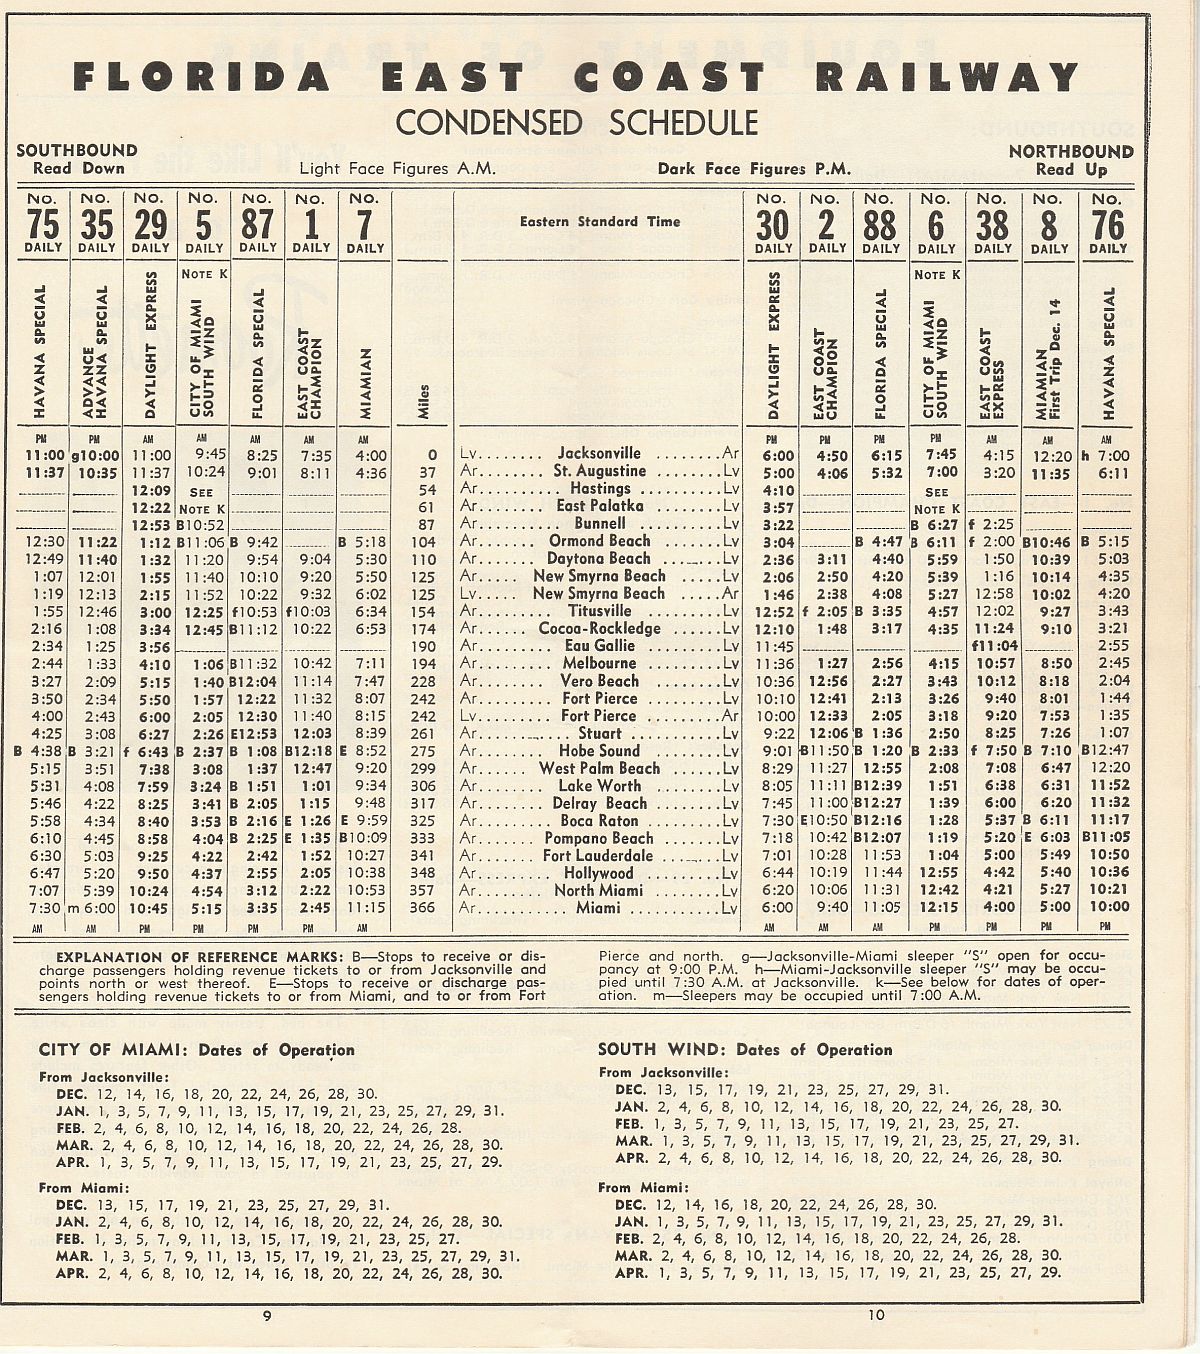 Florida East Coast Railway Dec. 12, 1957 timetable Pg. 9-10: Condensed Schedule Florida East Coast Railway December 12, 1957 timetable featuring all passenger trains on the F.E.C. between Jacksonville and Miami